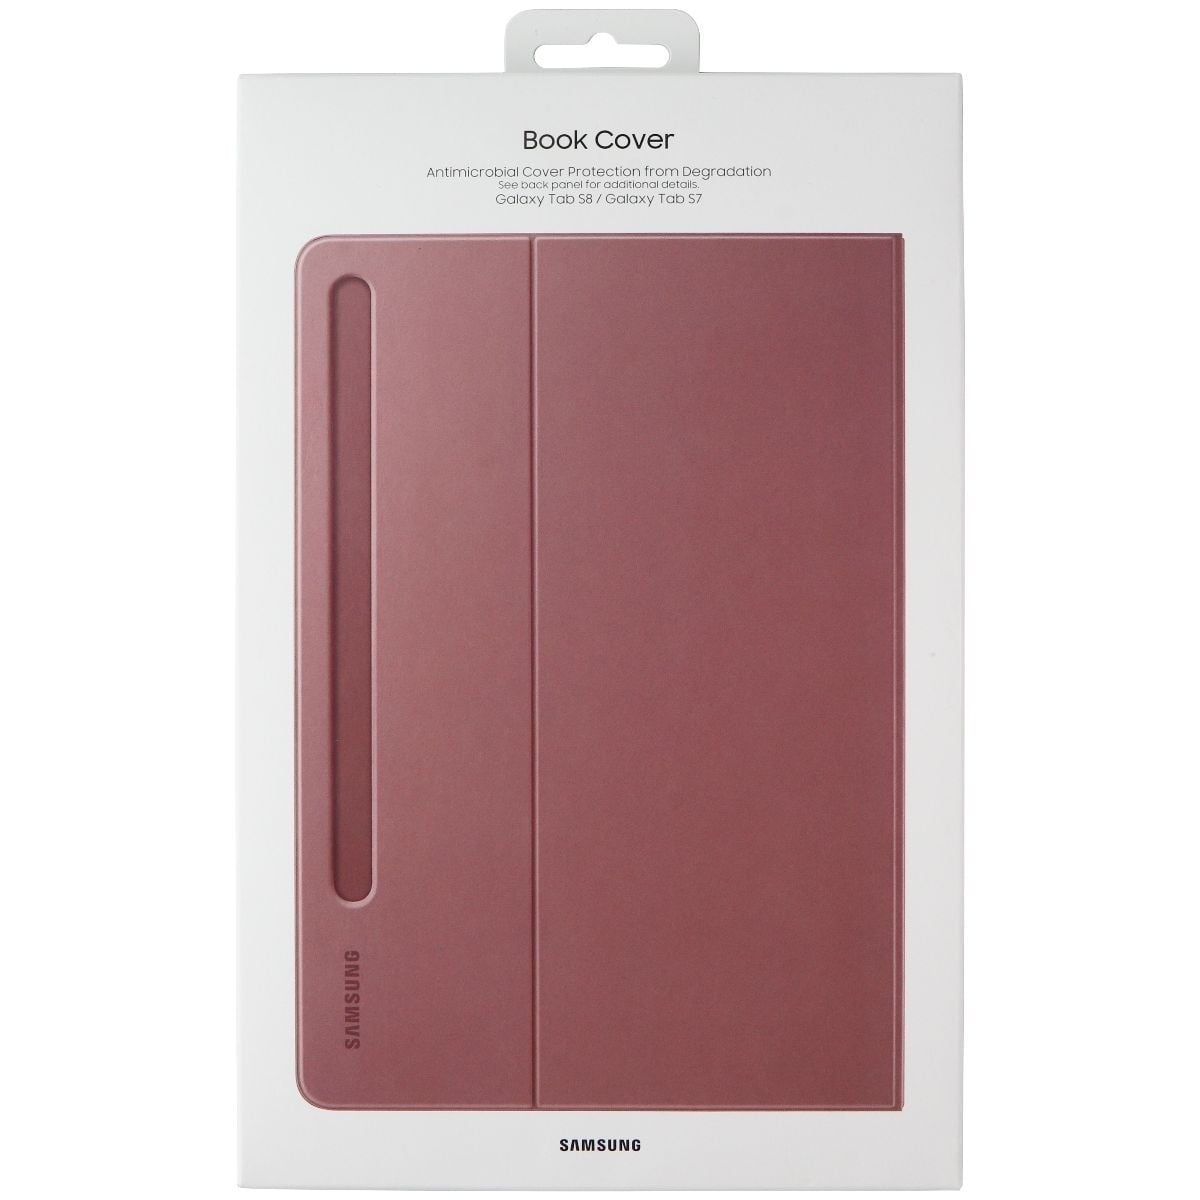 Galaxy Tab S8 / S7 Book Cover, Pink Mobile Accessories - EF-BT630PAEGUJ